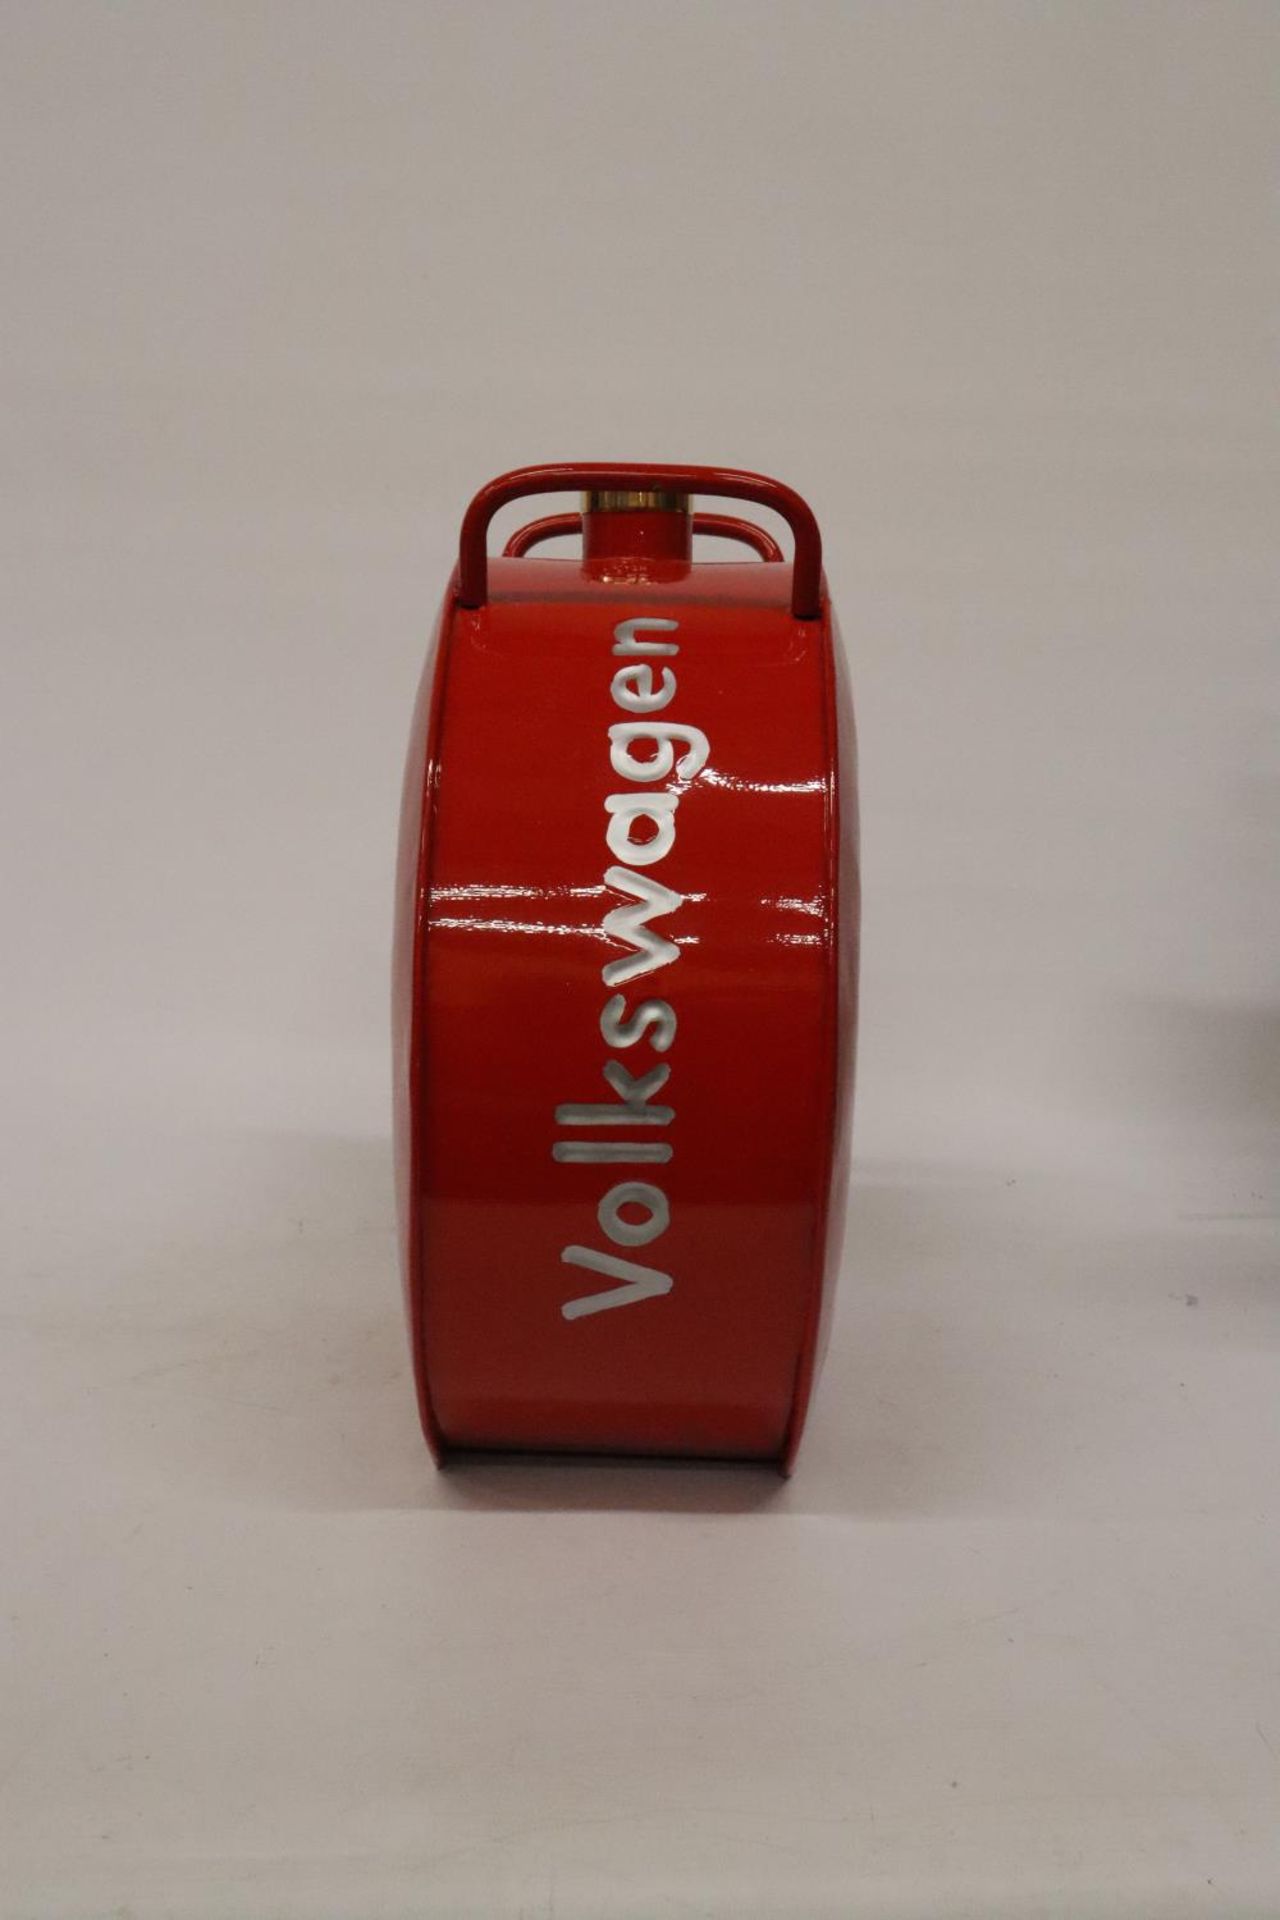 A RED VW PETROL CAN - Image 3 of 4